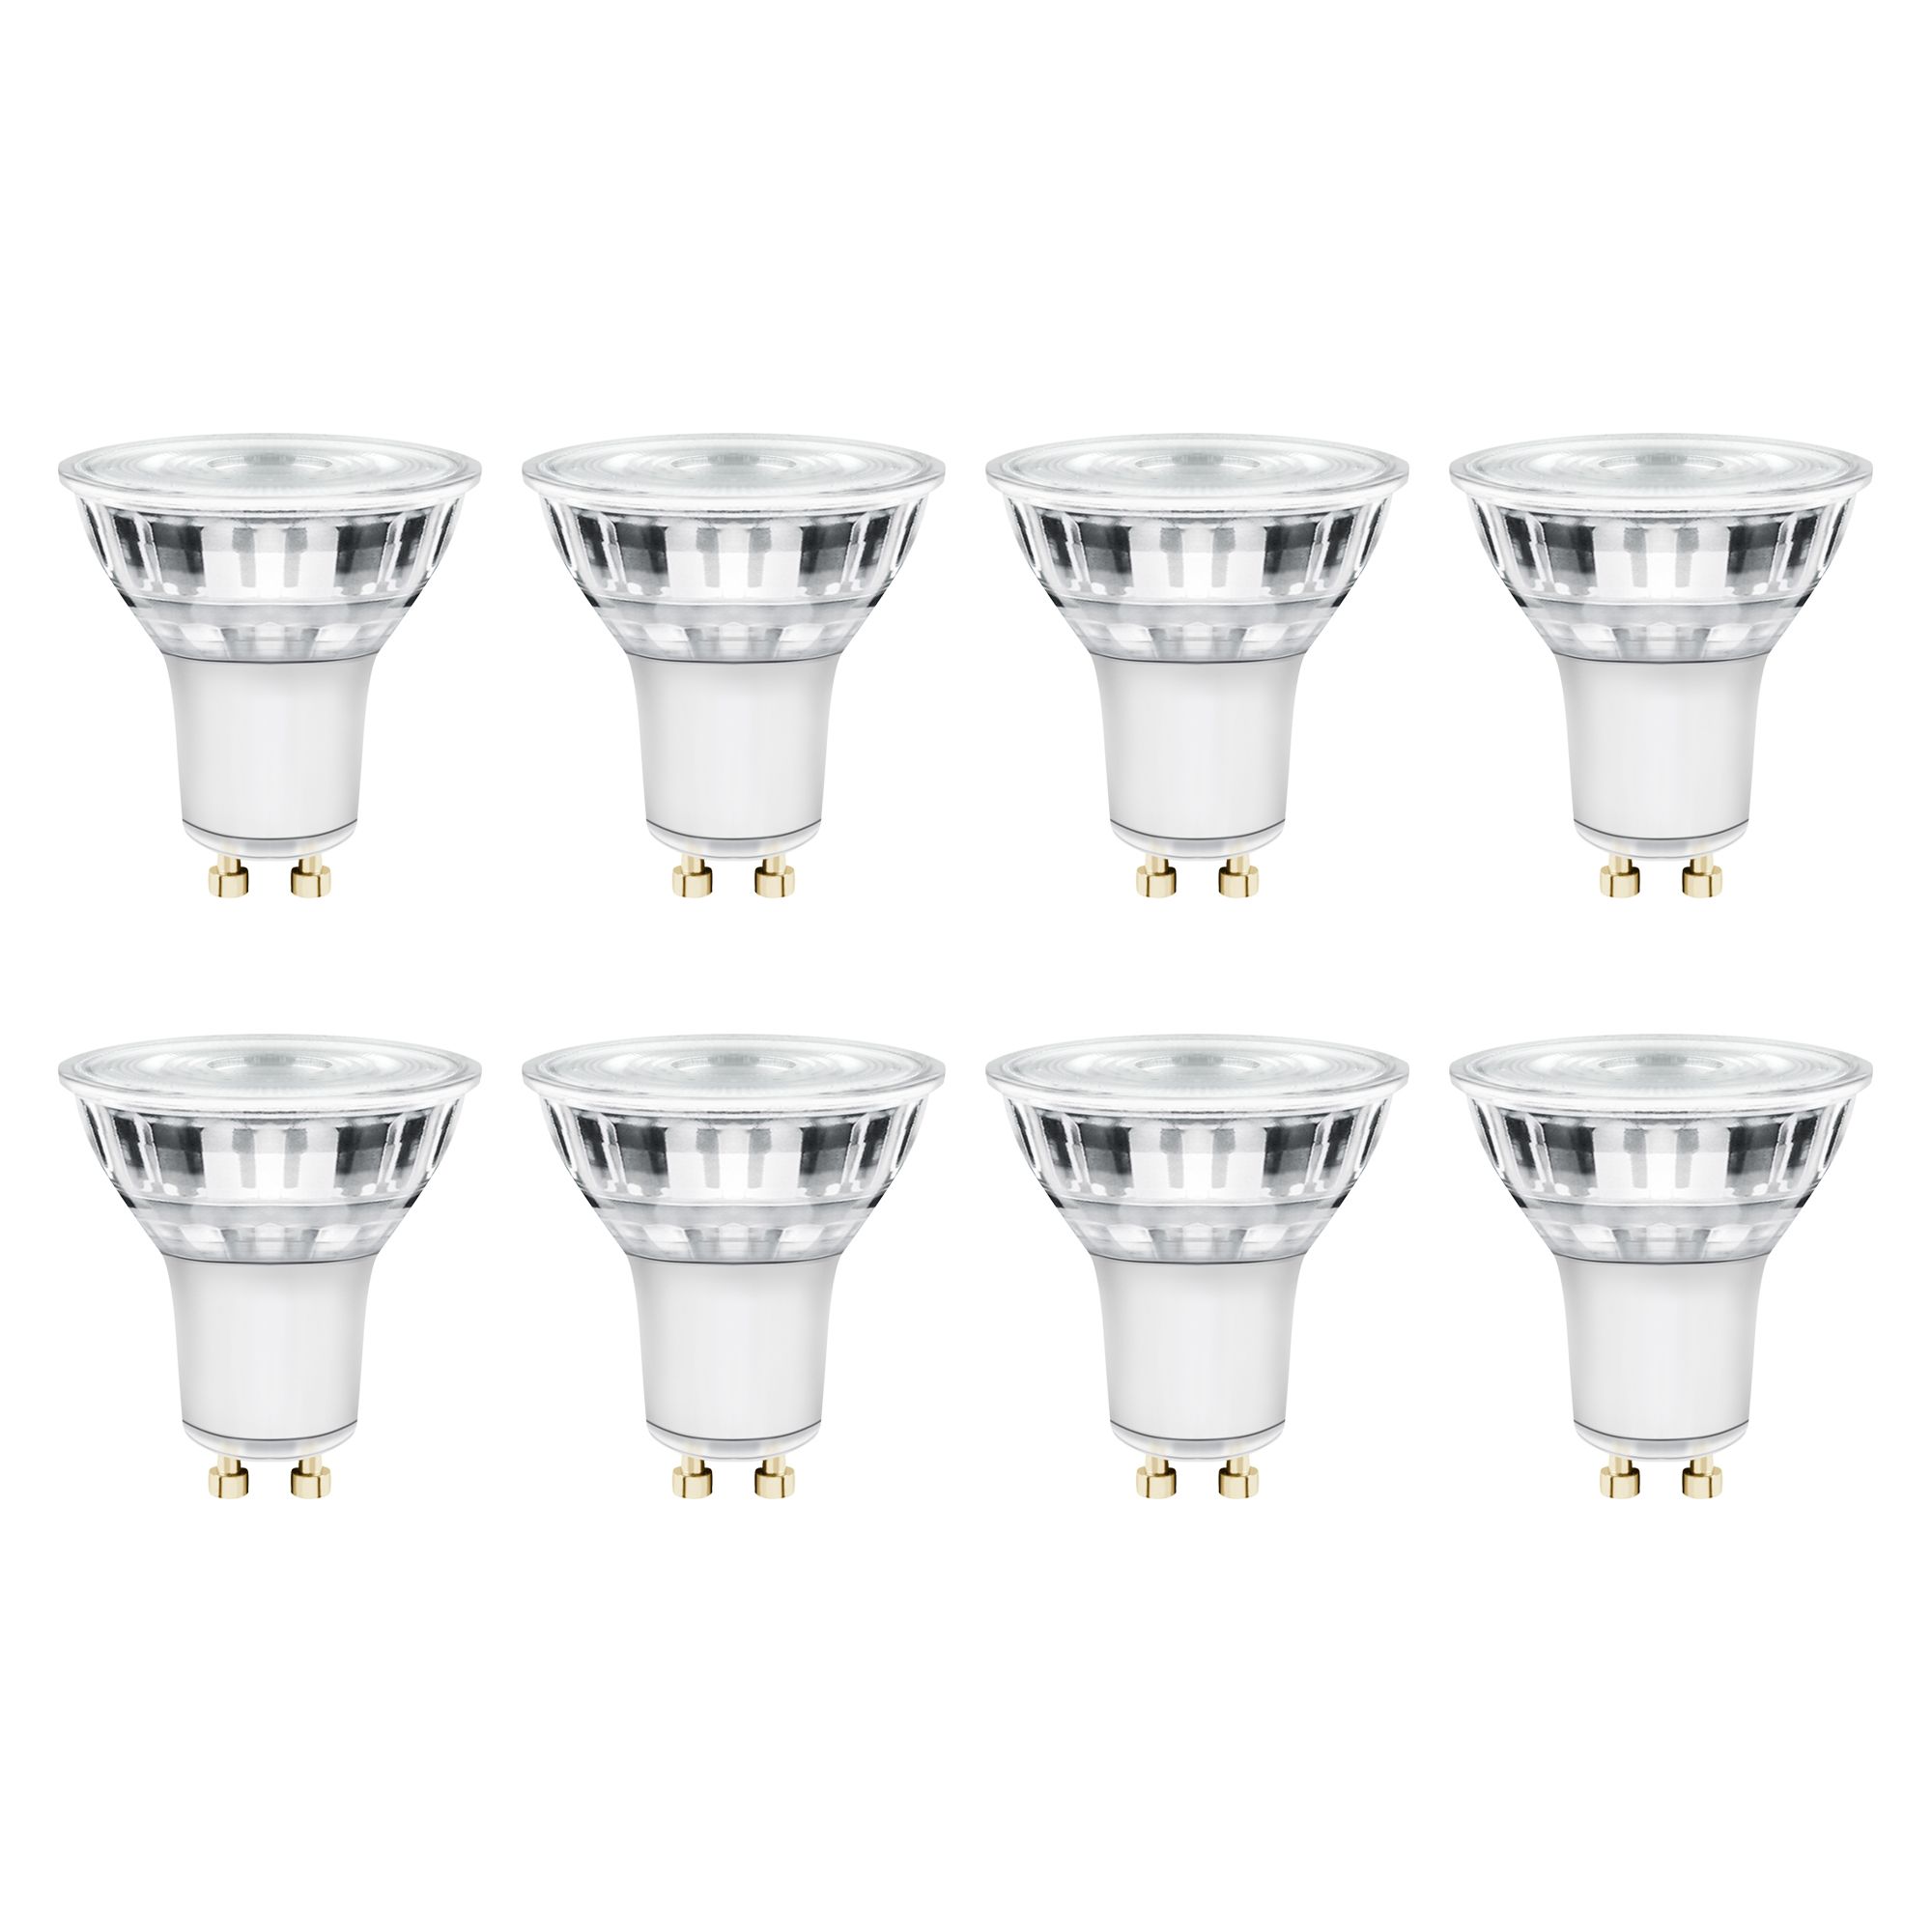 Diall 3.6W 345lm Clear Reflector spot Neutral white LED Light bulb, Pack of 8